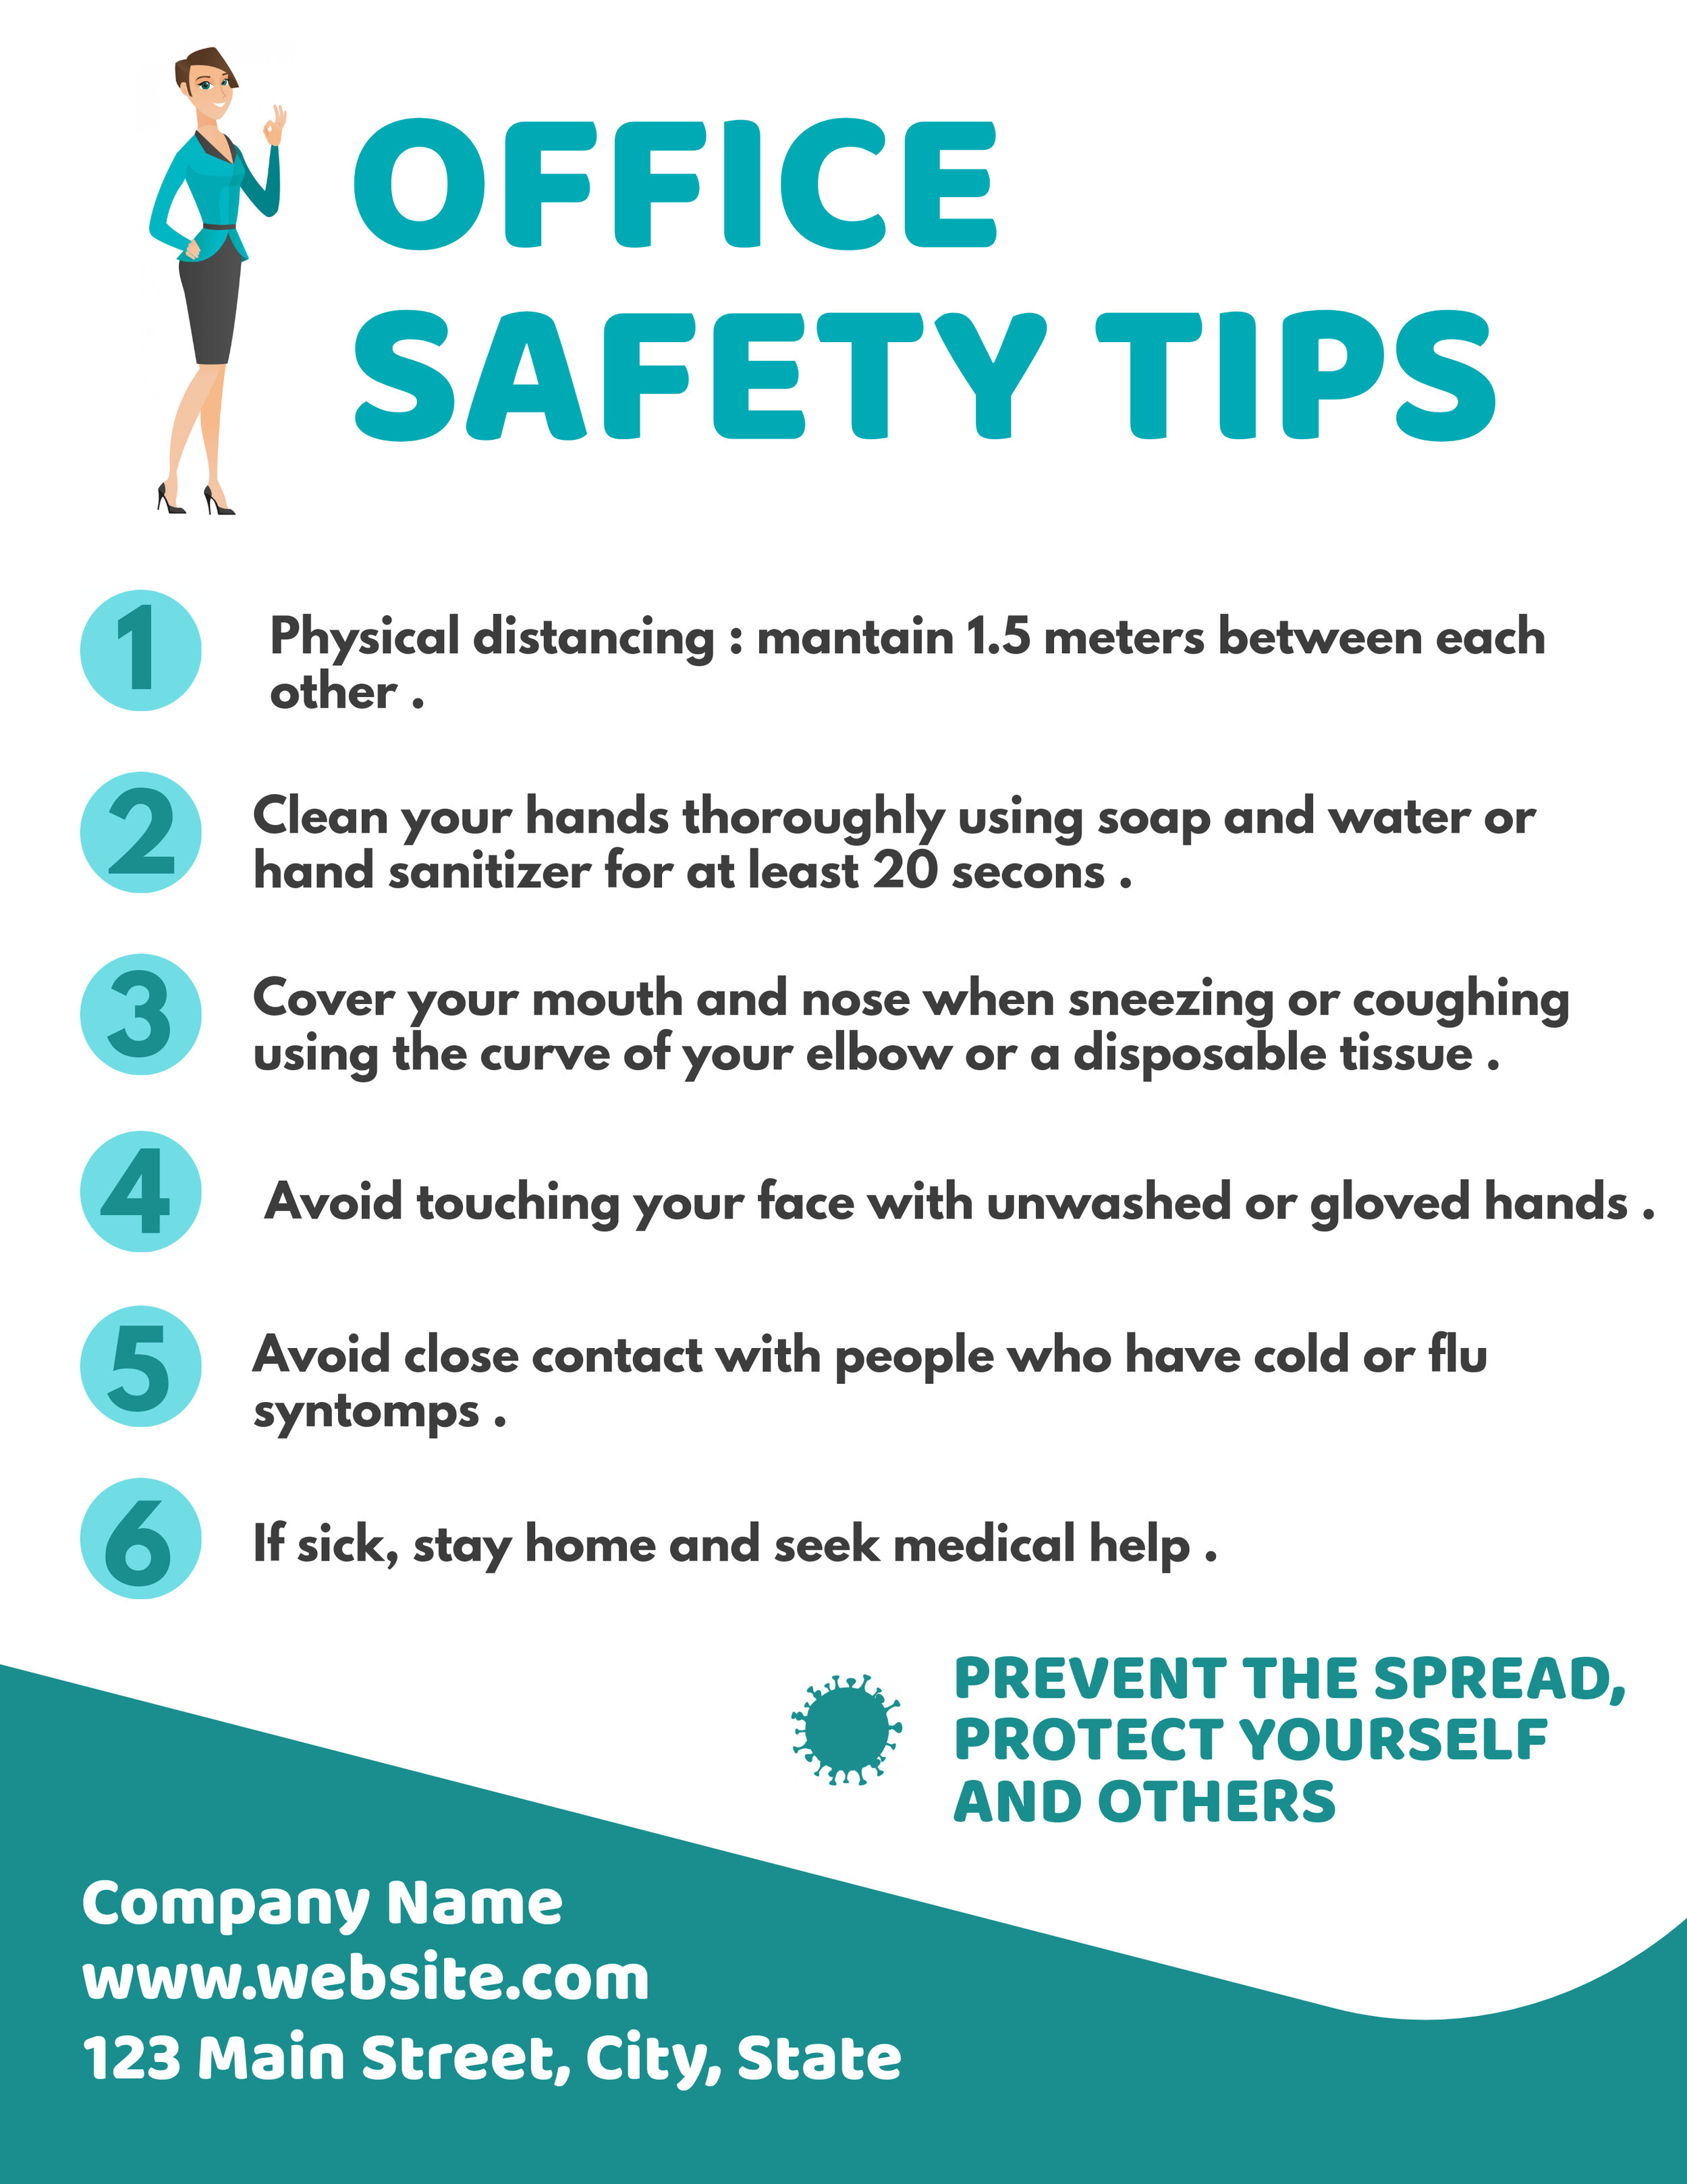 Office safety tips flyer